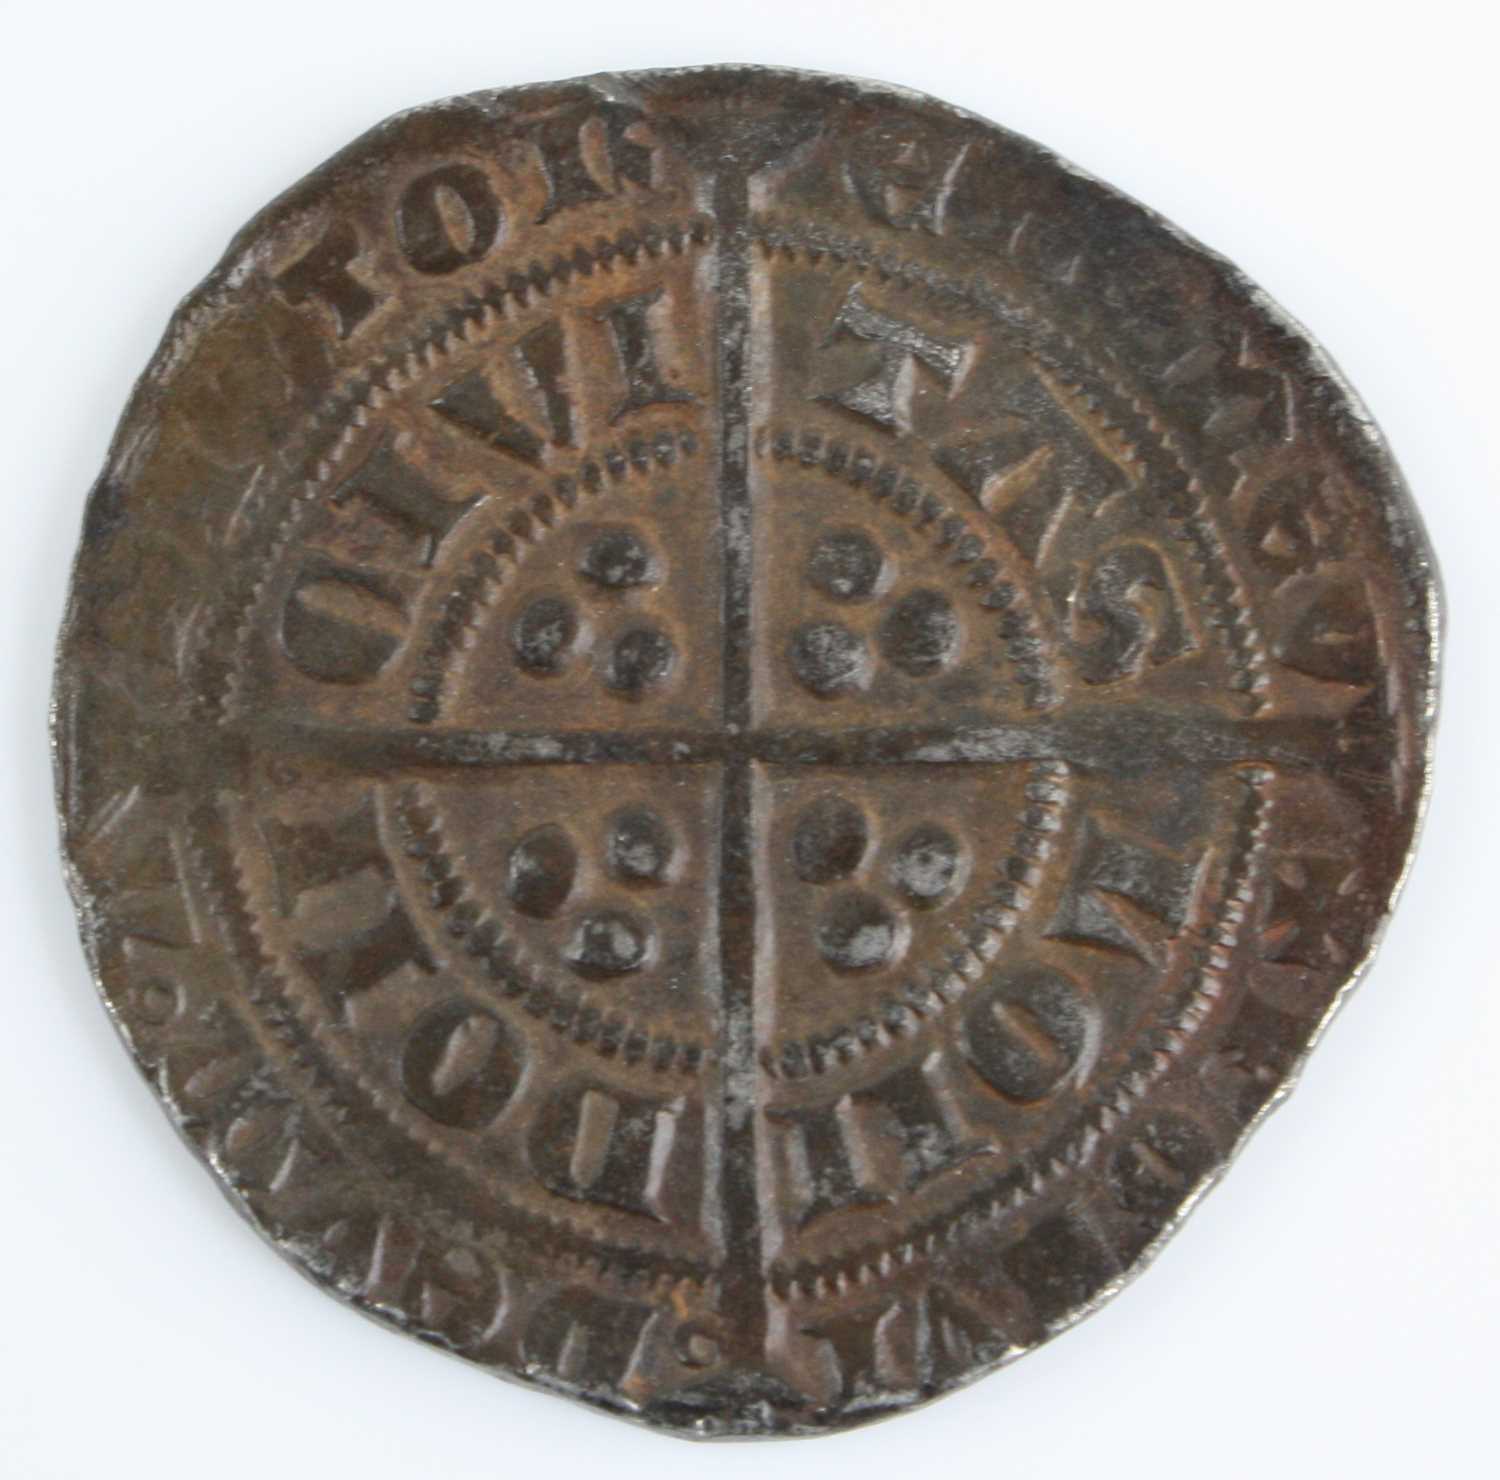 England, Edward III (1327-1377) groat, obv: crowned facing bust within legend, rev: long cross - Image 2 of 11